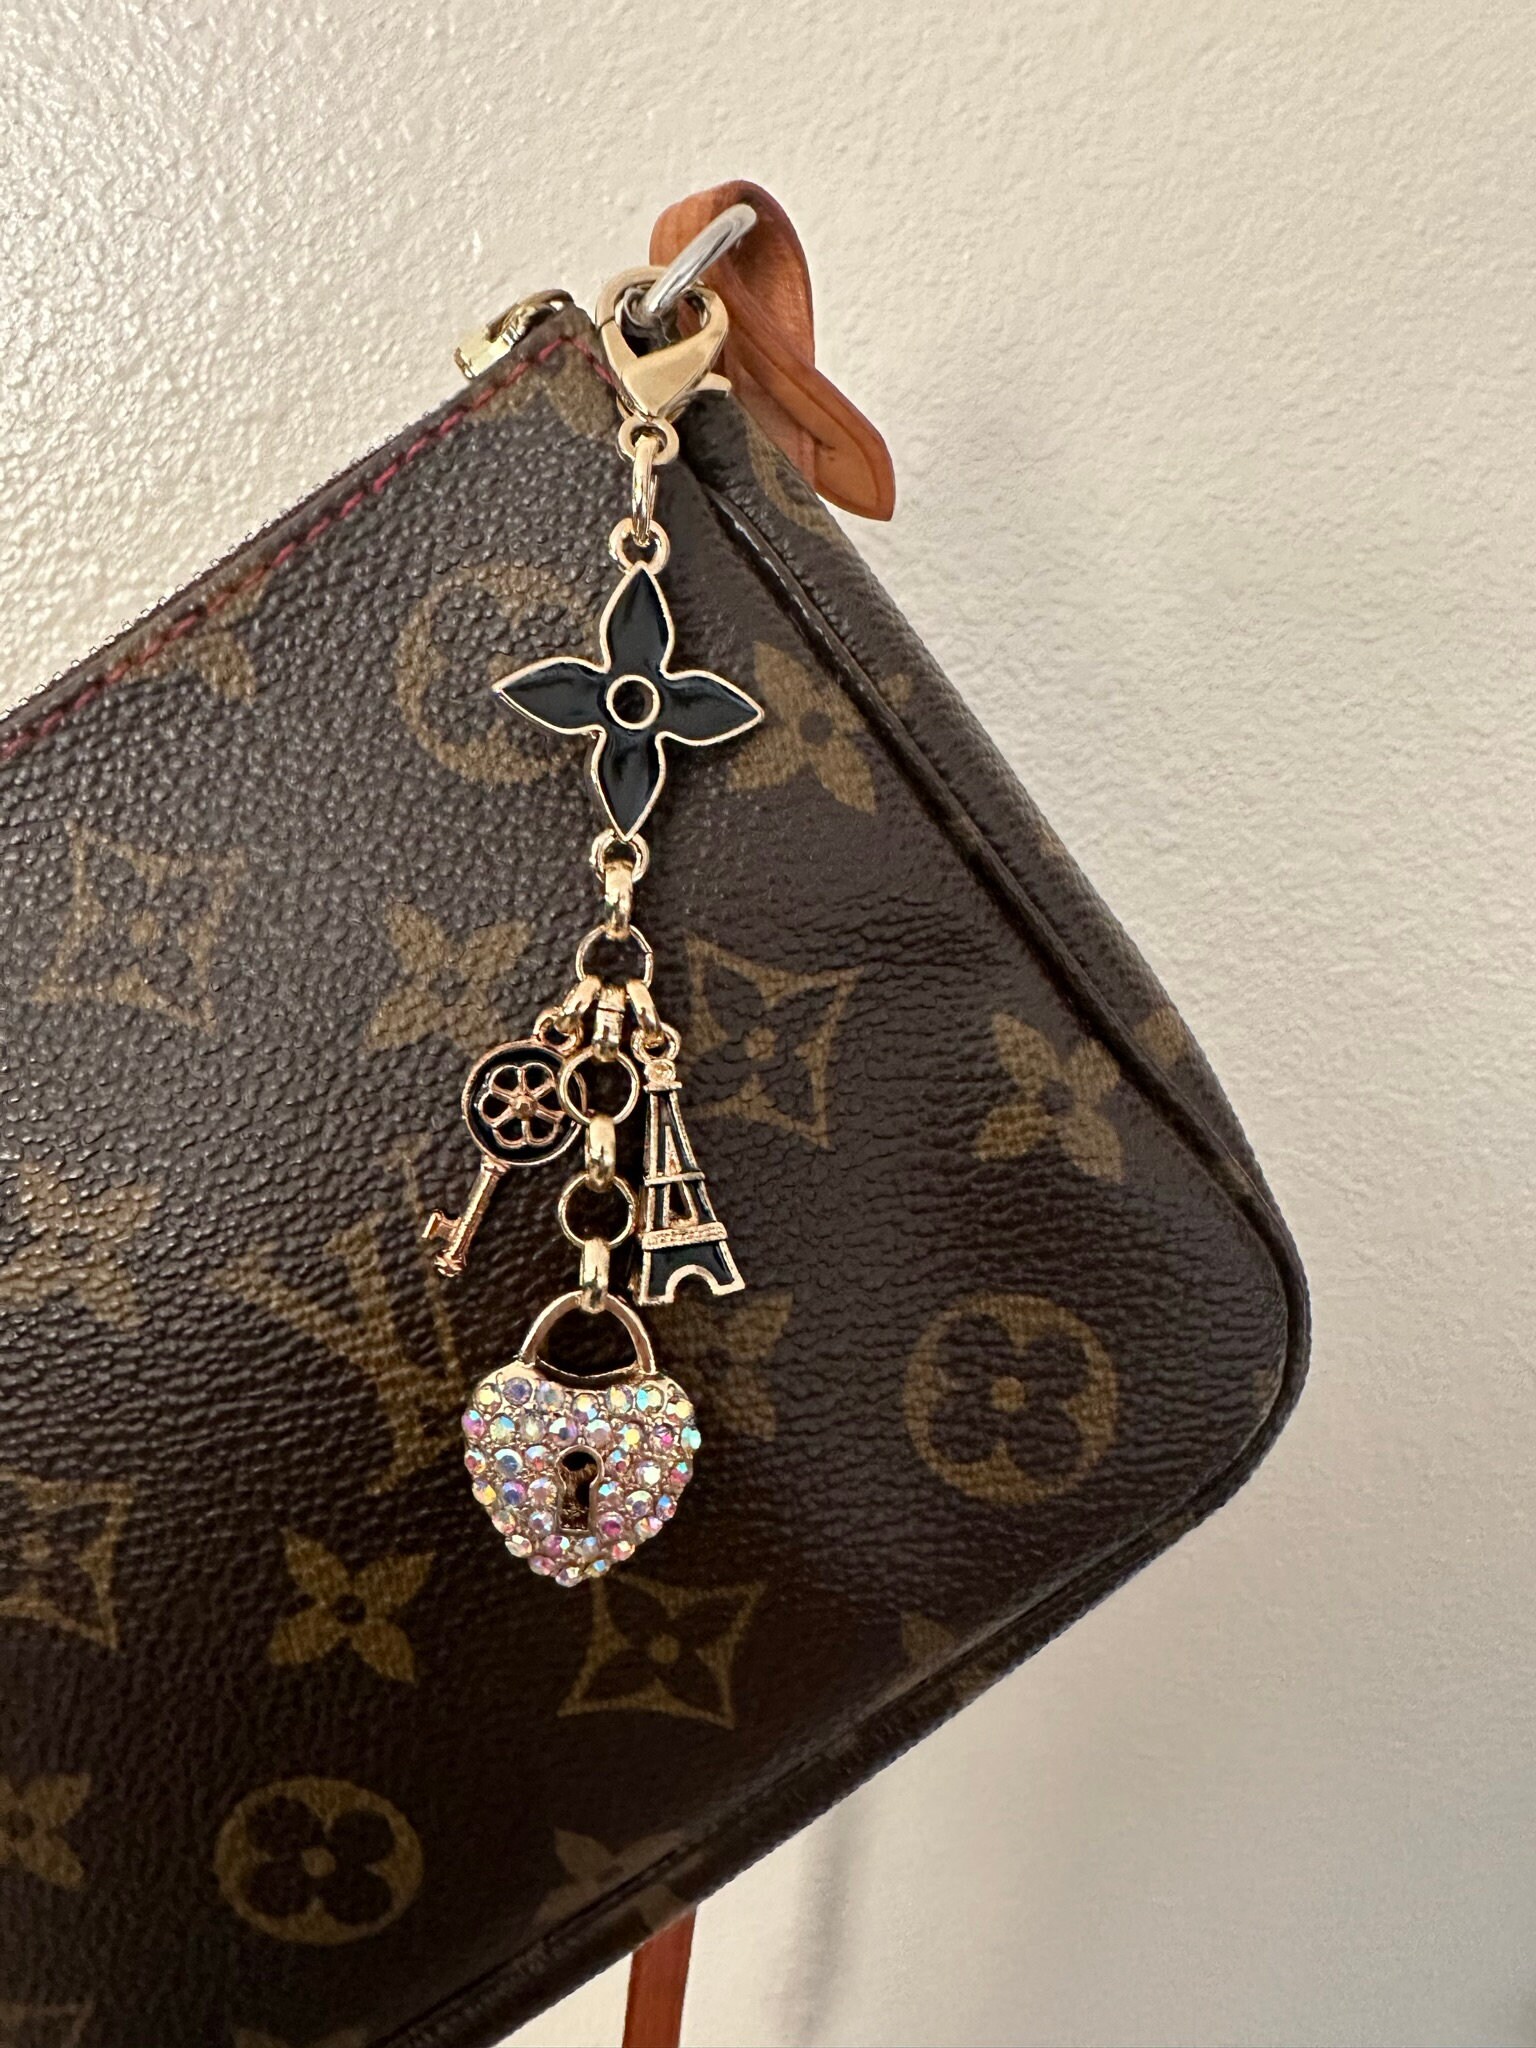 Mini Pochette Accessories Tiny Shoulder Bags Little Pouch With Gold Chain  Cute Purses Cross Body Luxury Pieces Mono Print Handbag Wallet Coin Pouches  From Bags_luxury, $49.73